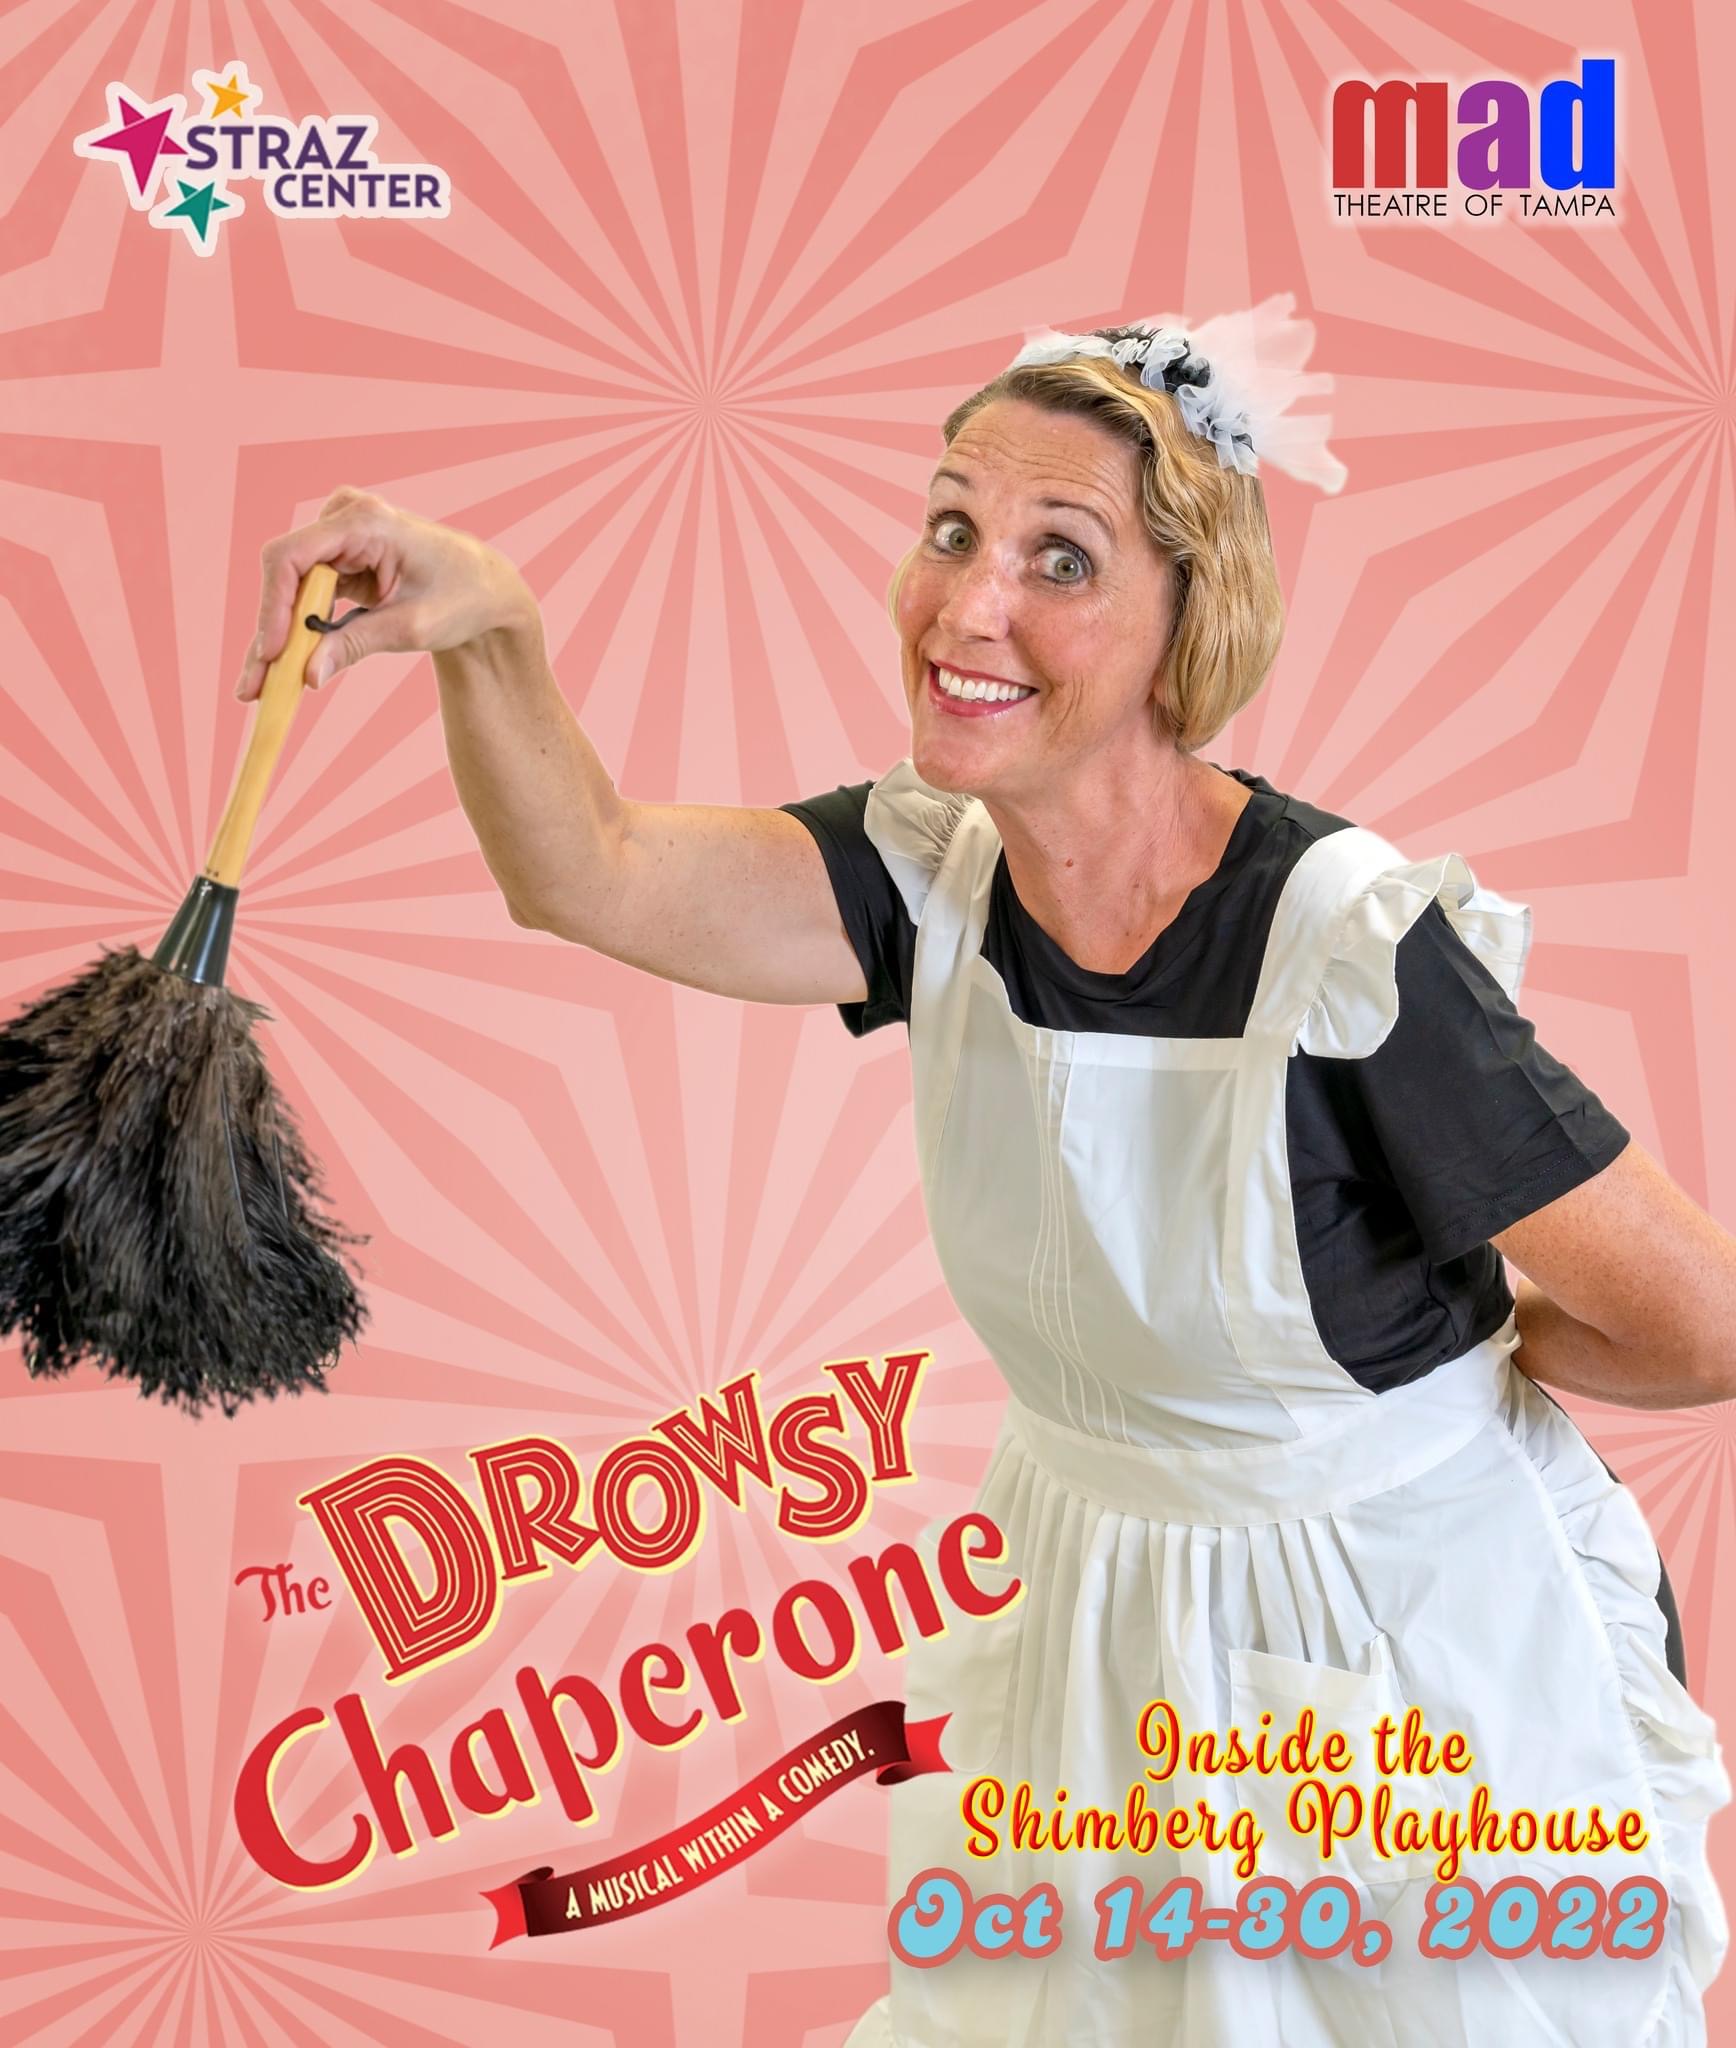 Meet Hattie as played by AndI Laaker in mad Theatre of Tampa’s “The Drowsy Chaperone